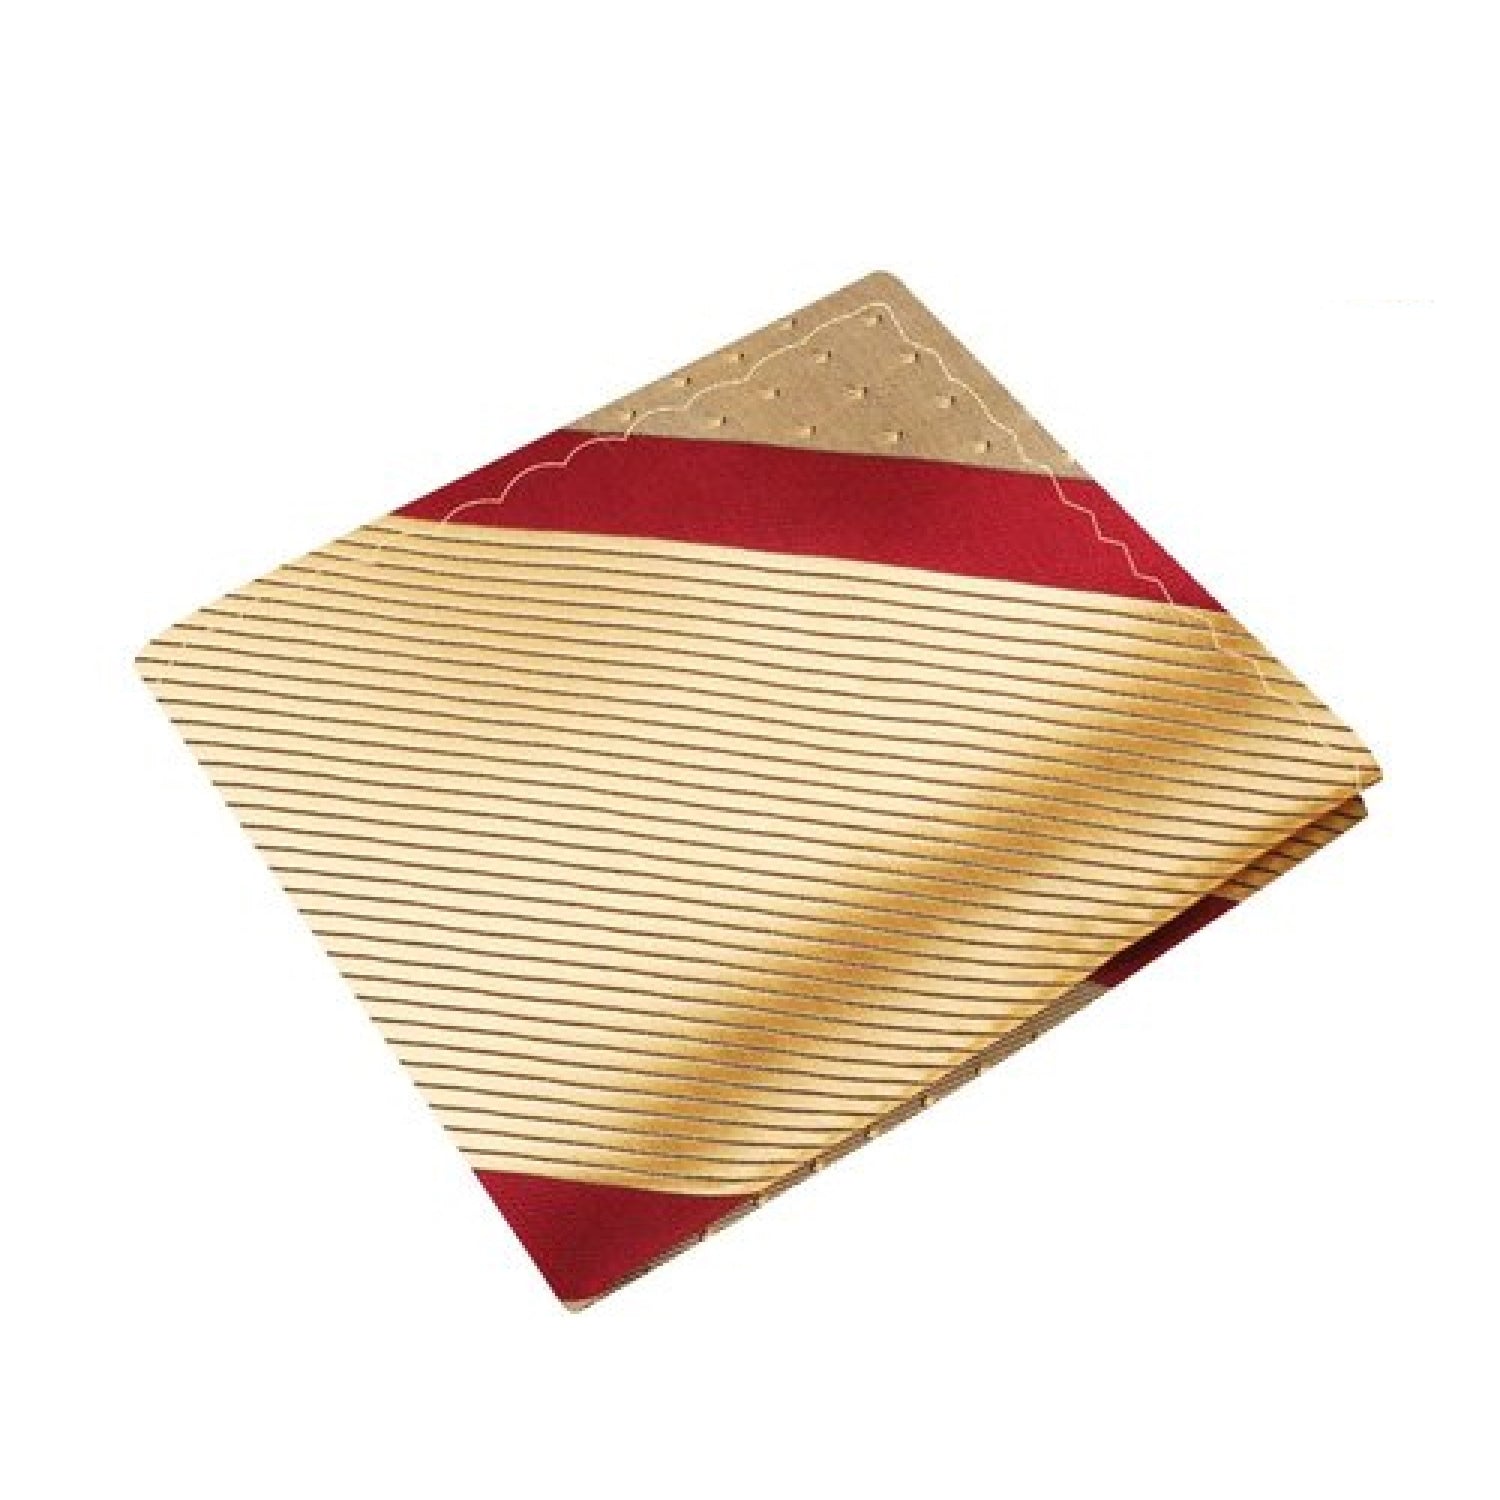 A Gold, Burgundy Color Stripe with Subtle Check and Stripe Texture Pattern Silk Pocket Square